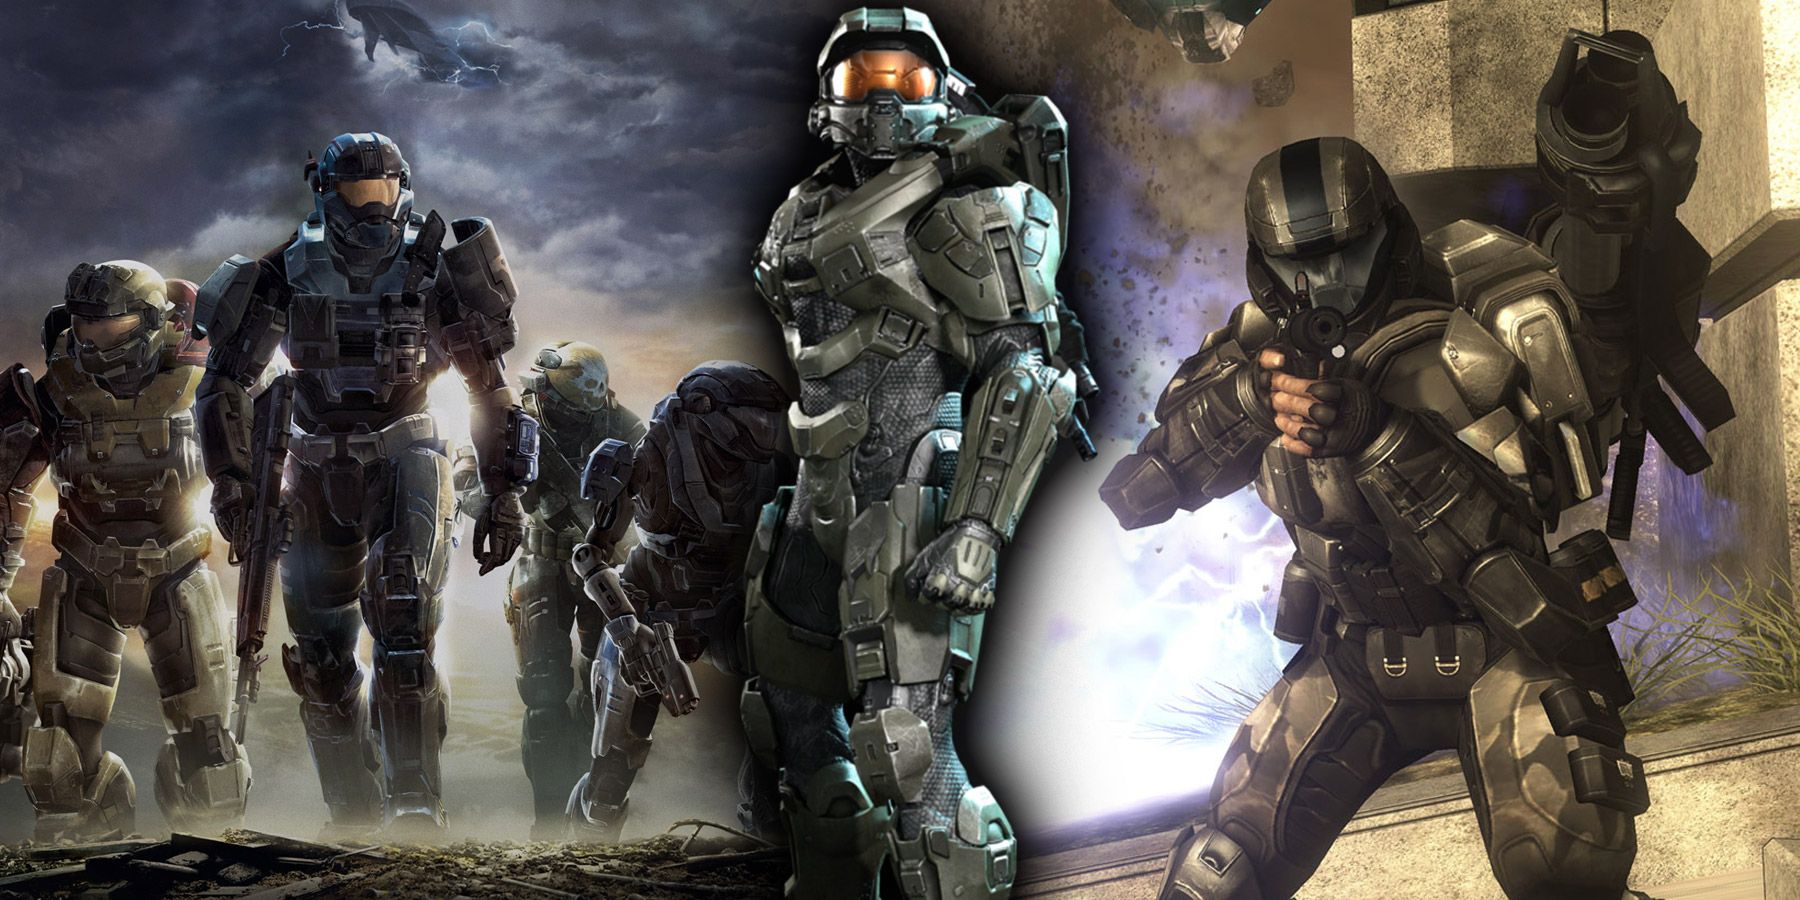 There Should be More Halo Stories Without Master Chief